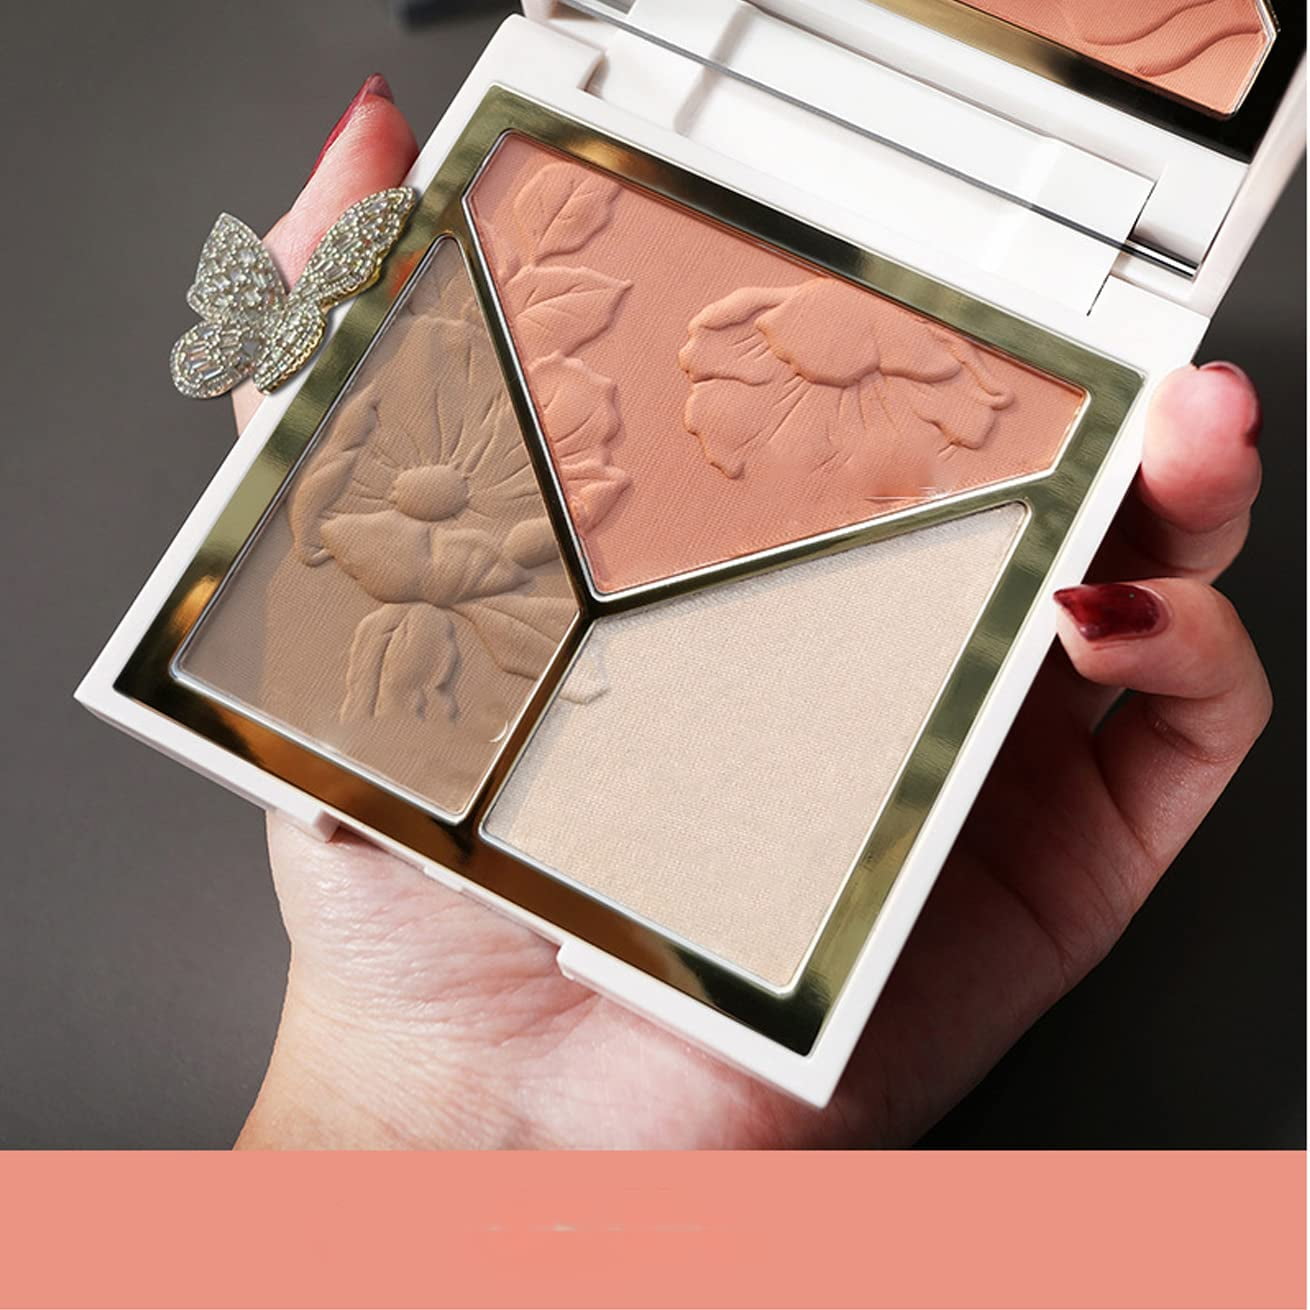  Highlighter & Contour & Blush 3 in 1 Makeup Palette with Brush,  Matte Shimmer Glow Illuminator Powder Perfect For Face  Highlight,Contour,Bronzer,Shape,Silky Brillliant Compact Make-up : Beauty &  Personal Care